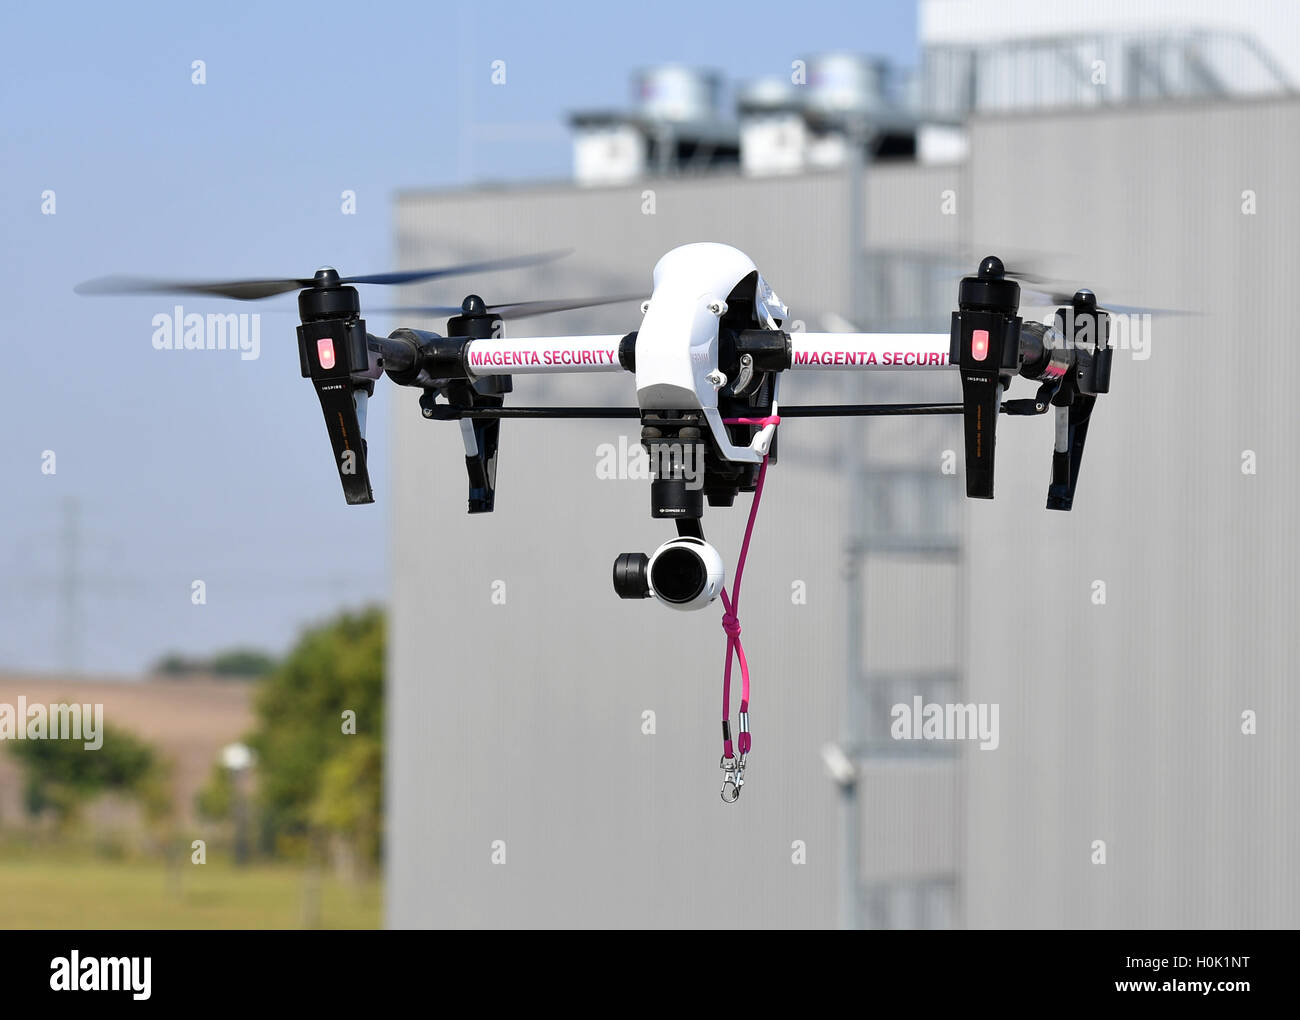 Biere, Germany. 12th Sep, 2016. A drone of Telekom with the inscription 'Magneta Telekom' flies across the grounds at the laying of the first stone for the expansion of the Cloud-Rechenzentrum of Deutsche Telekom in Biere, Germany, 12 September 2016. Photo: Jens Kalaene/dpa/Alamy Live News Stock Photo